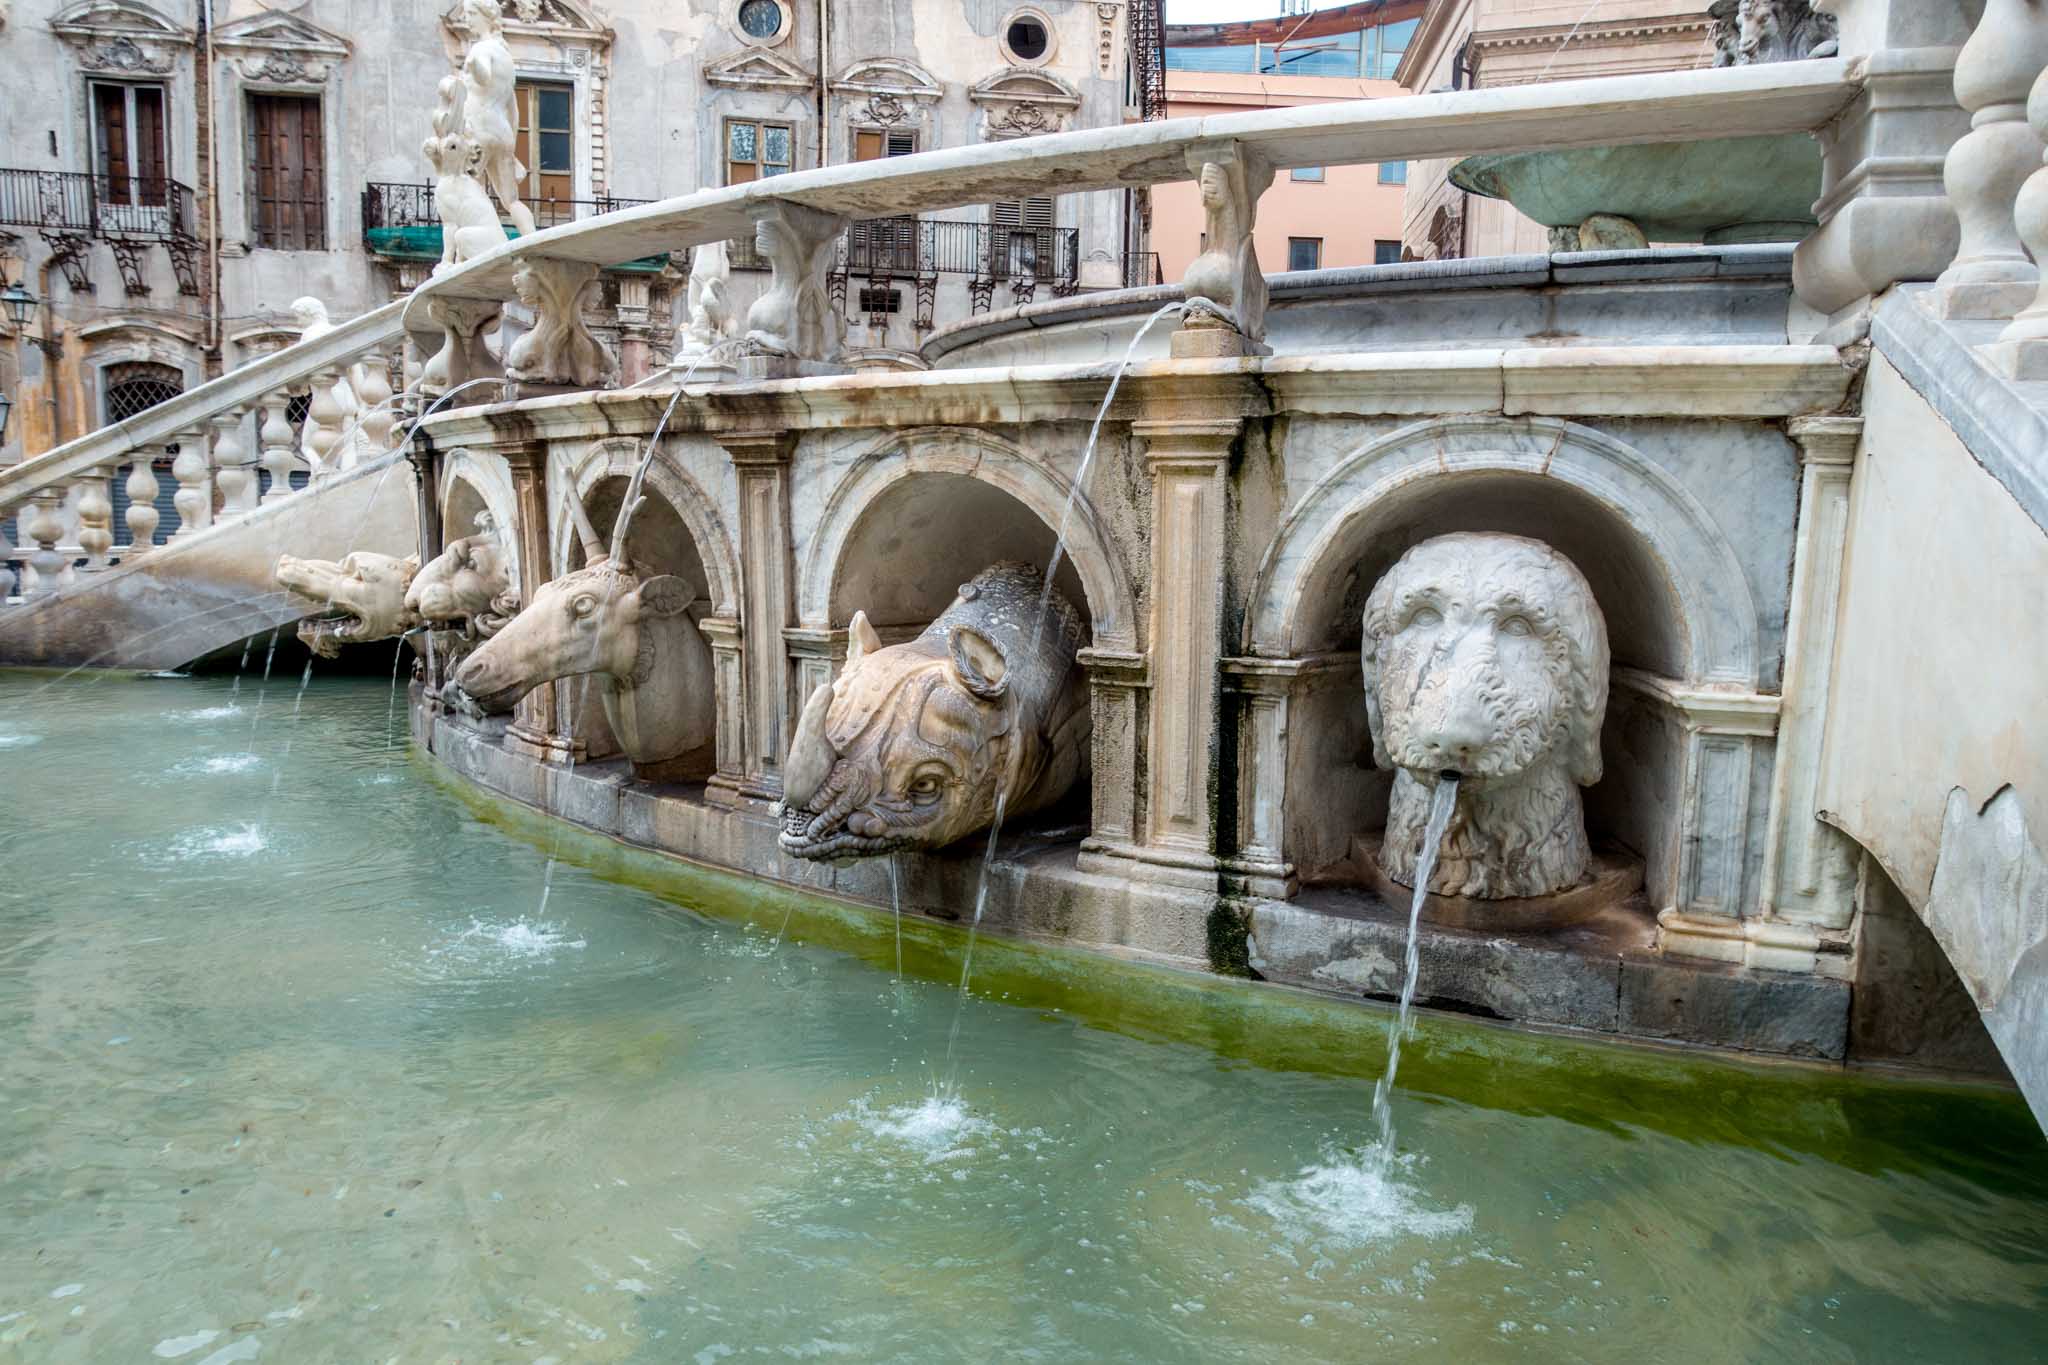 Animals spouting water at the base of fountain